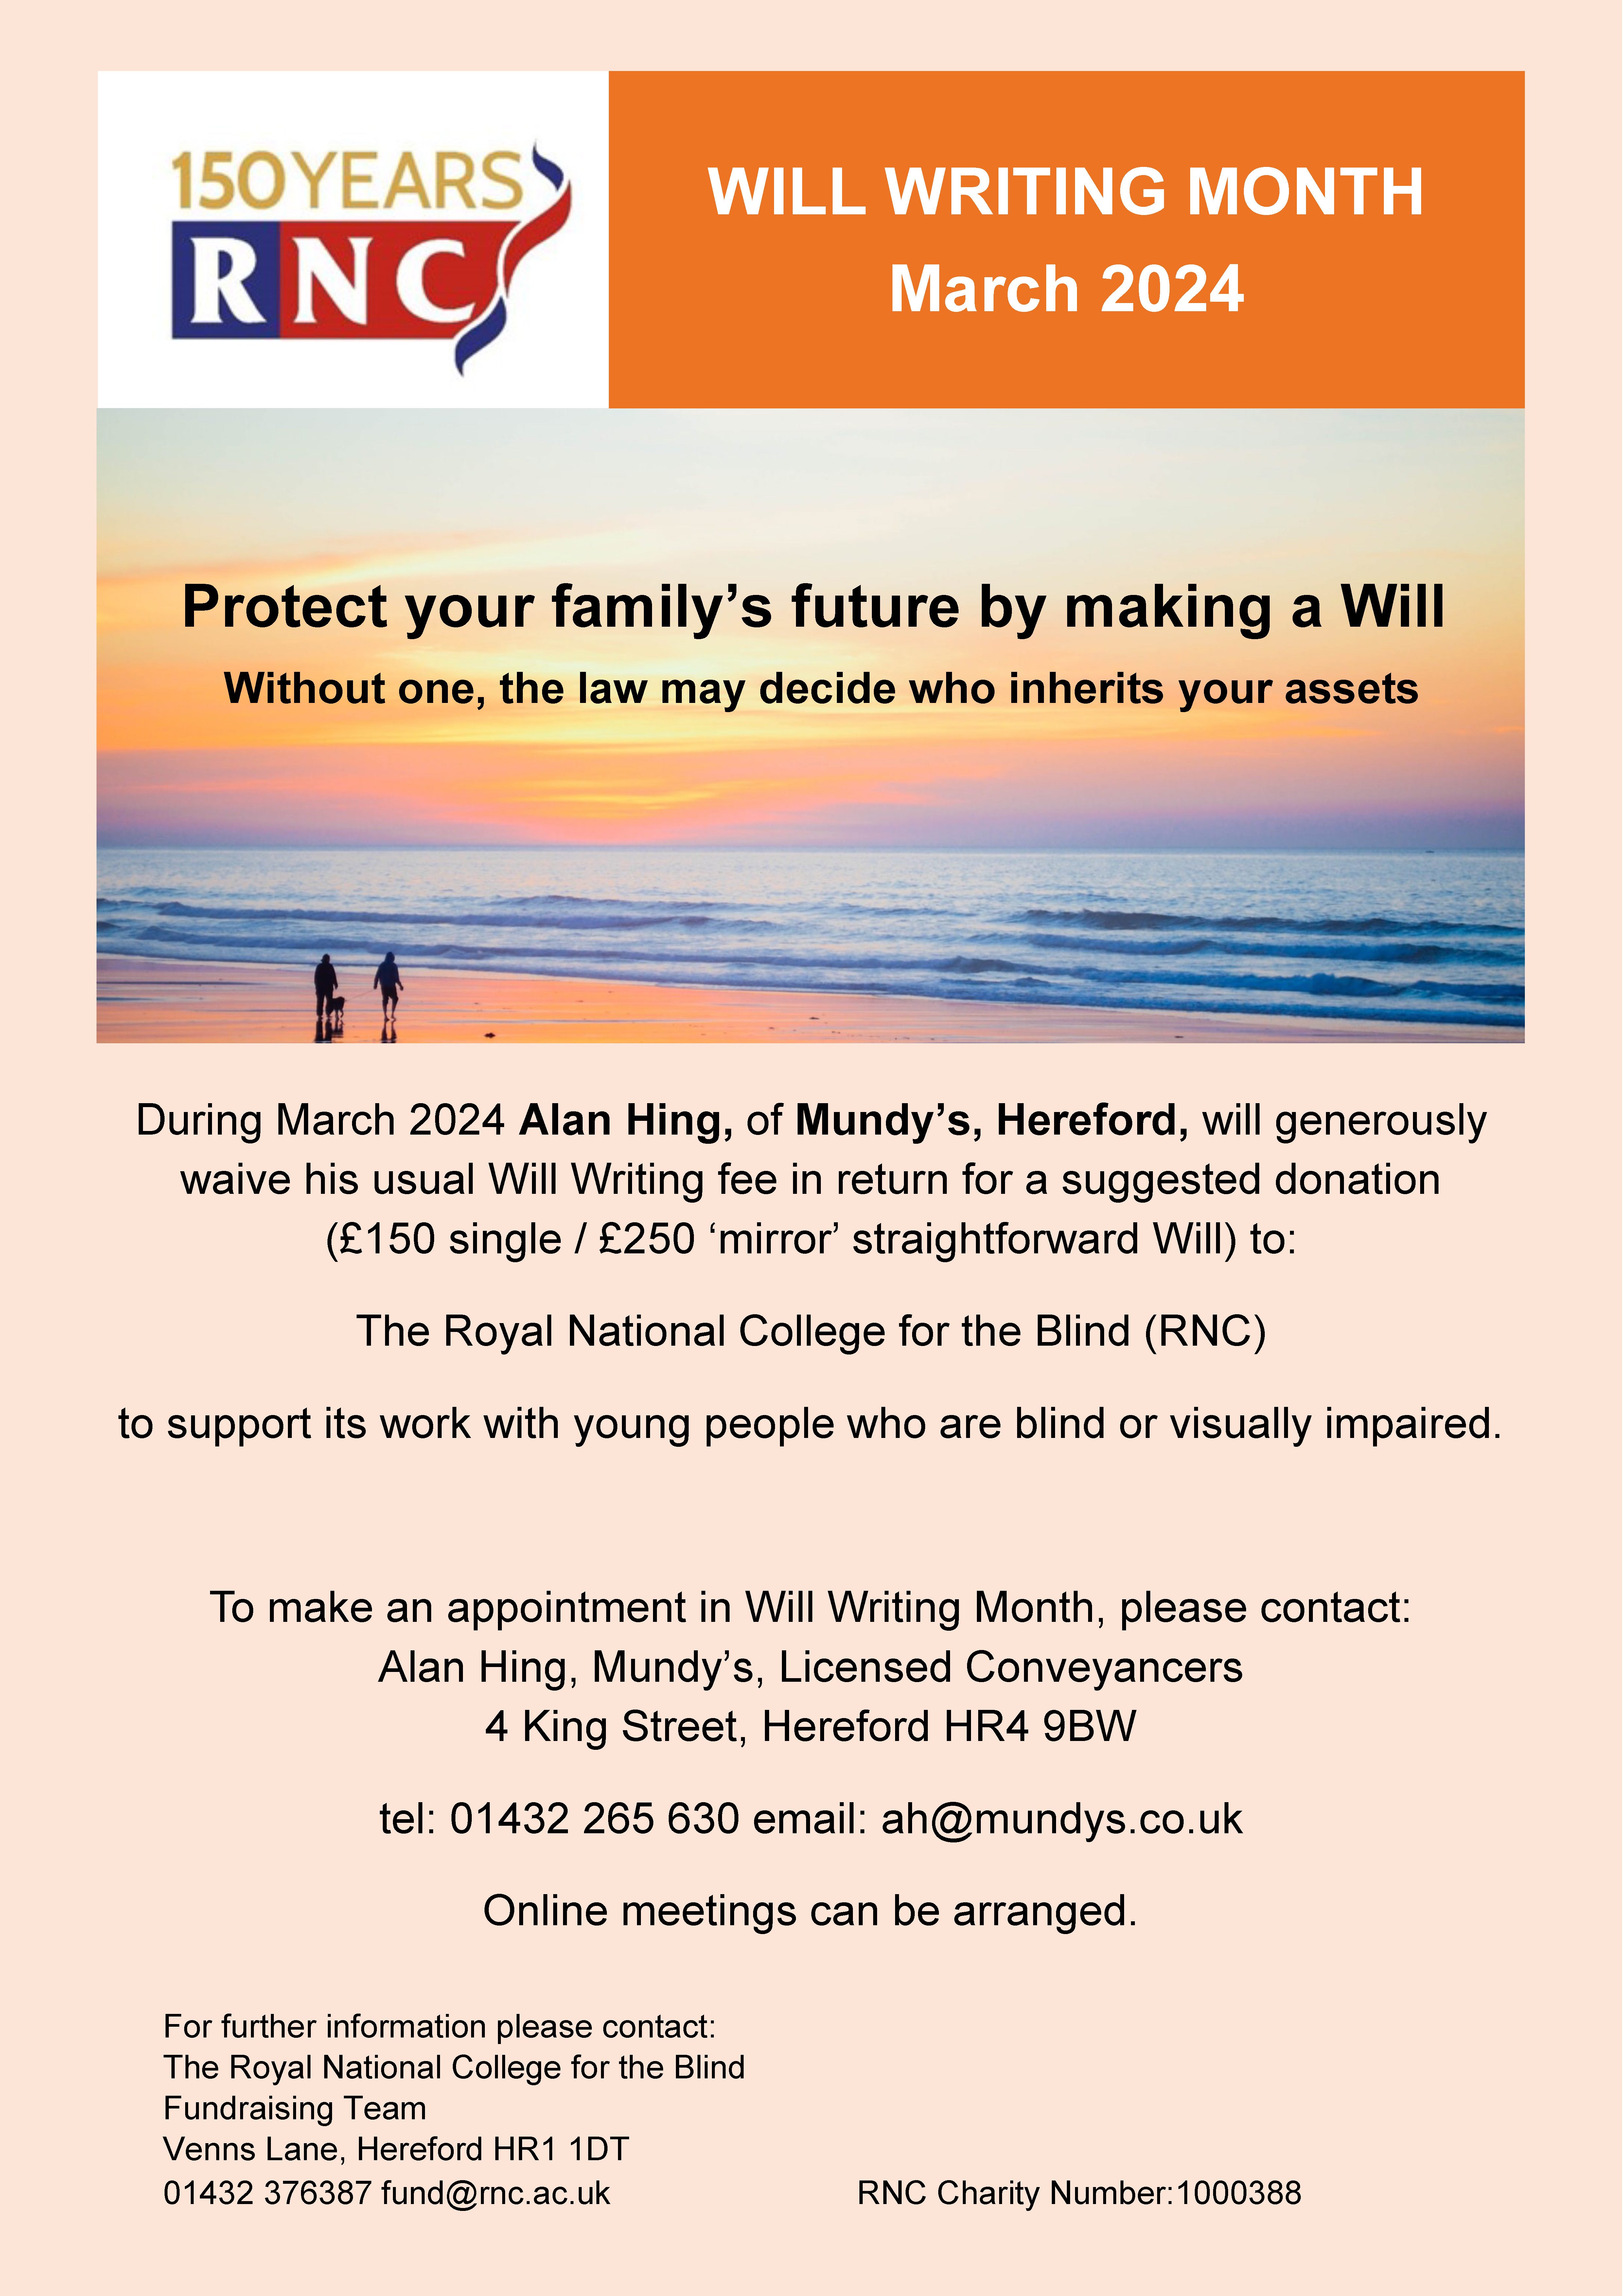 An orange coloured poster with the RNC 150th logo and a picture of two people and a dog walking on the beach at sunset plus details of how to make an appointment